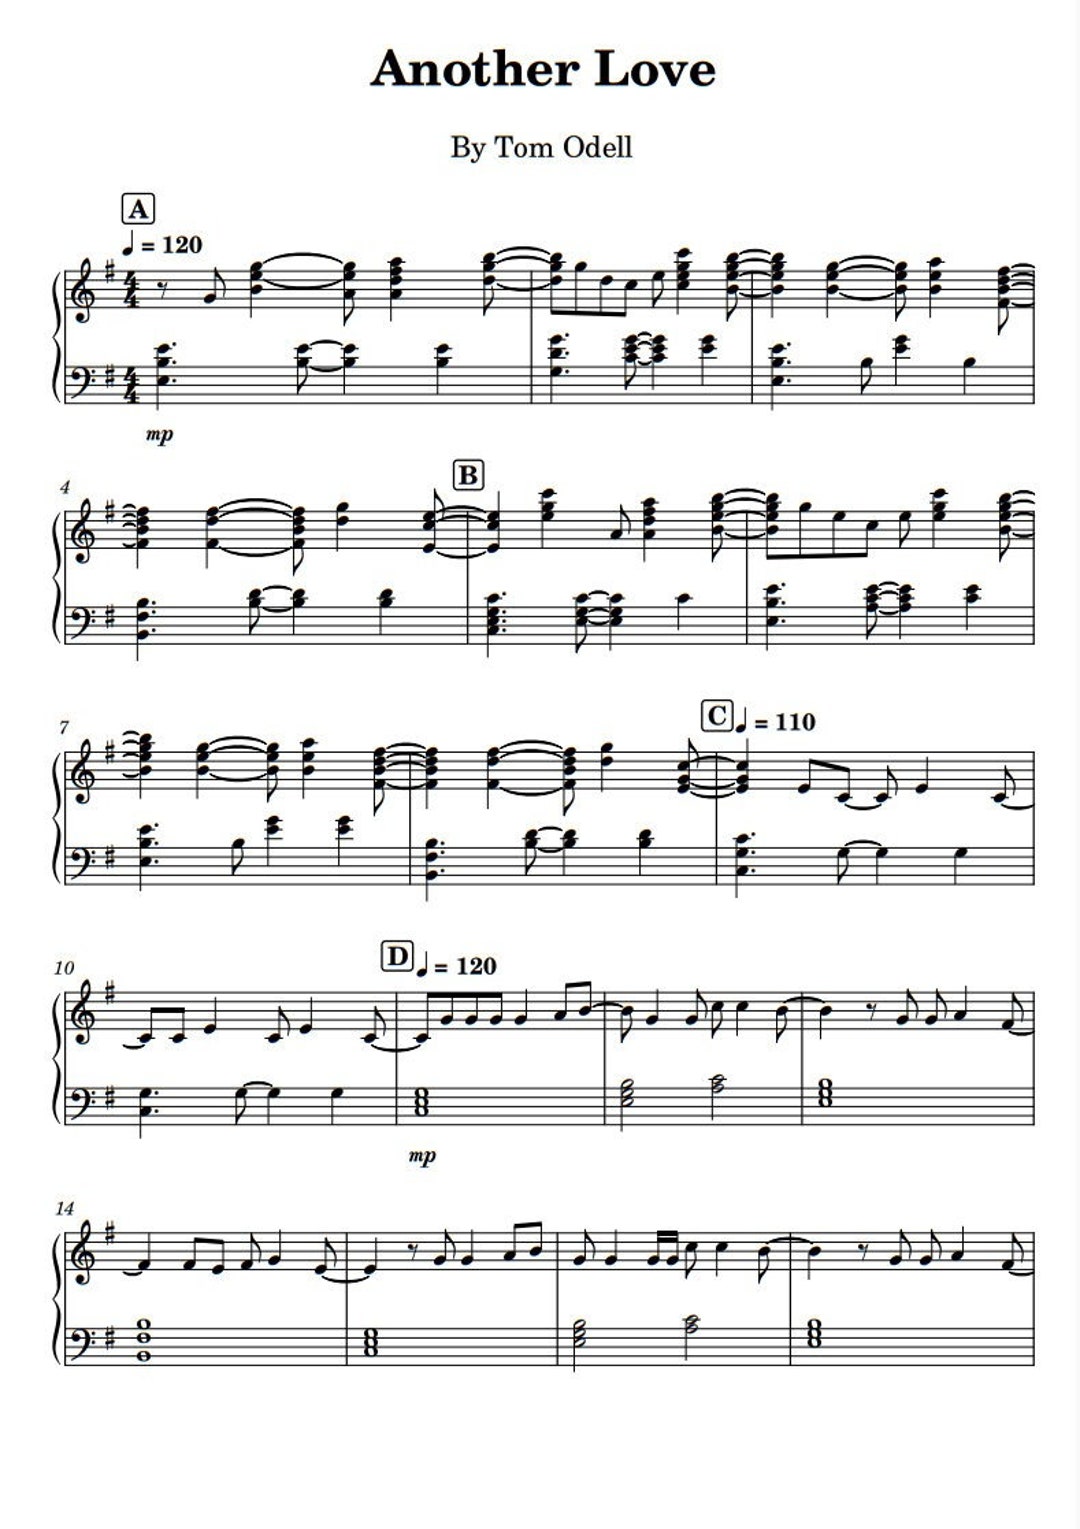 Tom Odell - Another Love (piano sheet music) Sheets by Mel's Music Corner